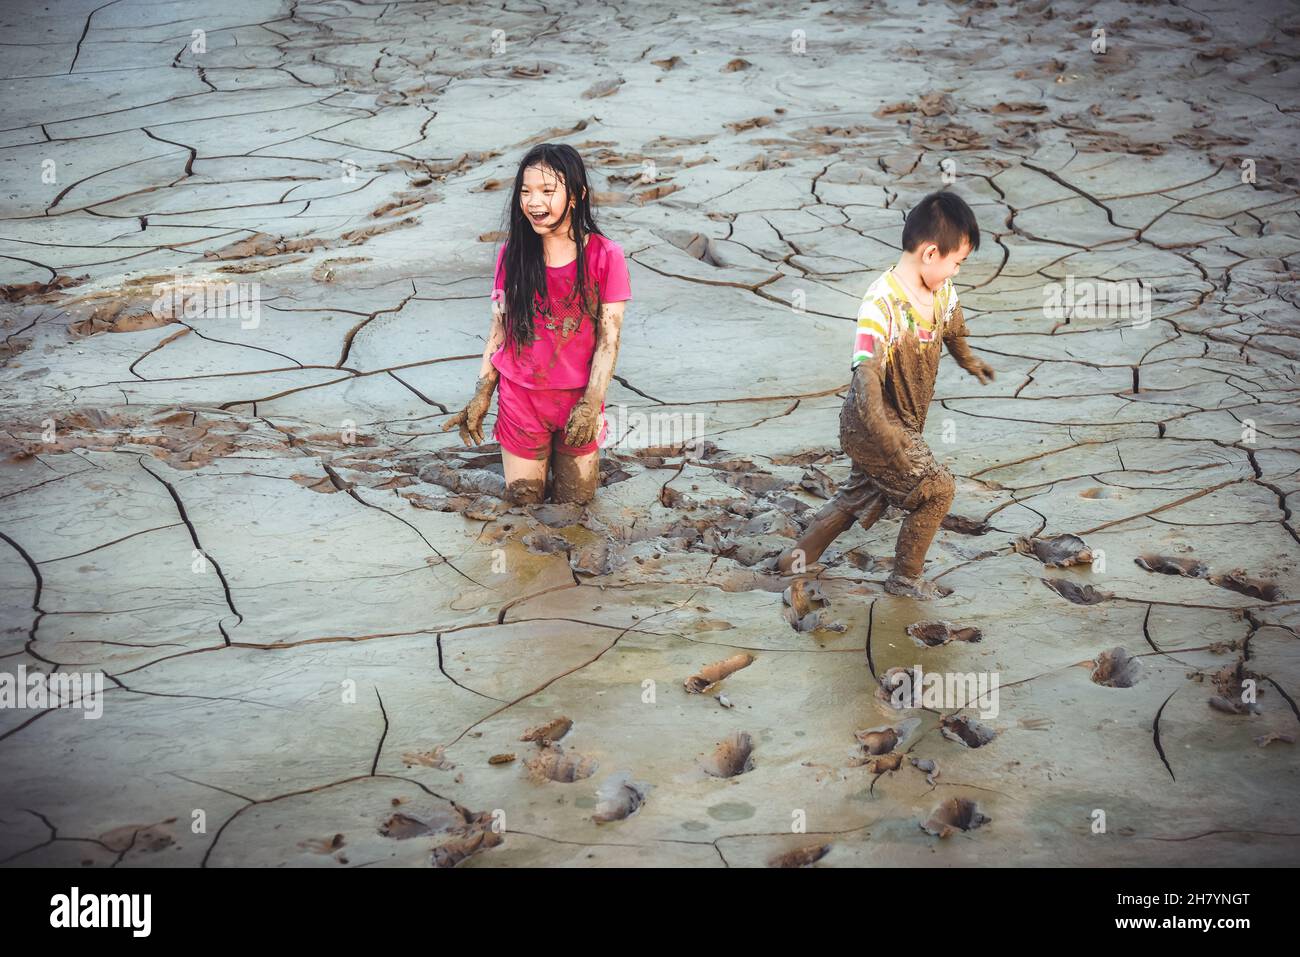 Children are playing in the mud during the quarantine days during the covid-19 pandemic when all activities are suspended for entertainment Stock Photo